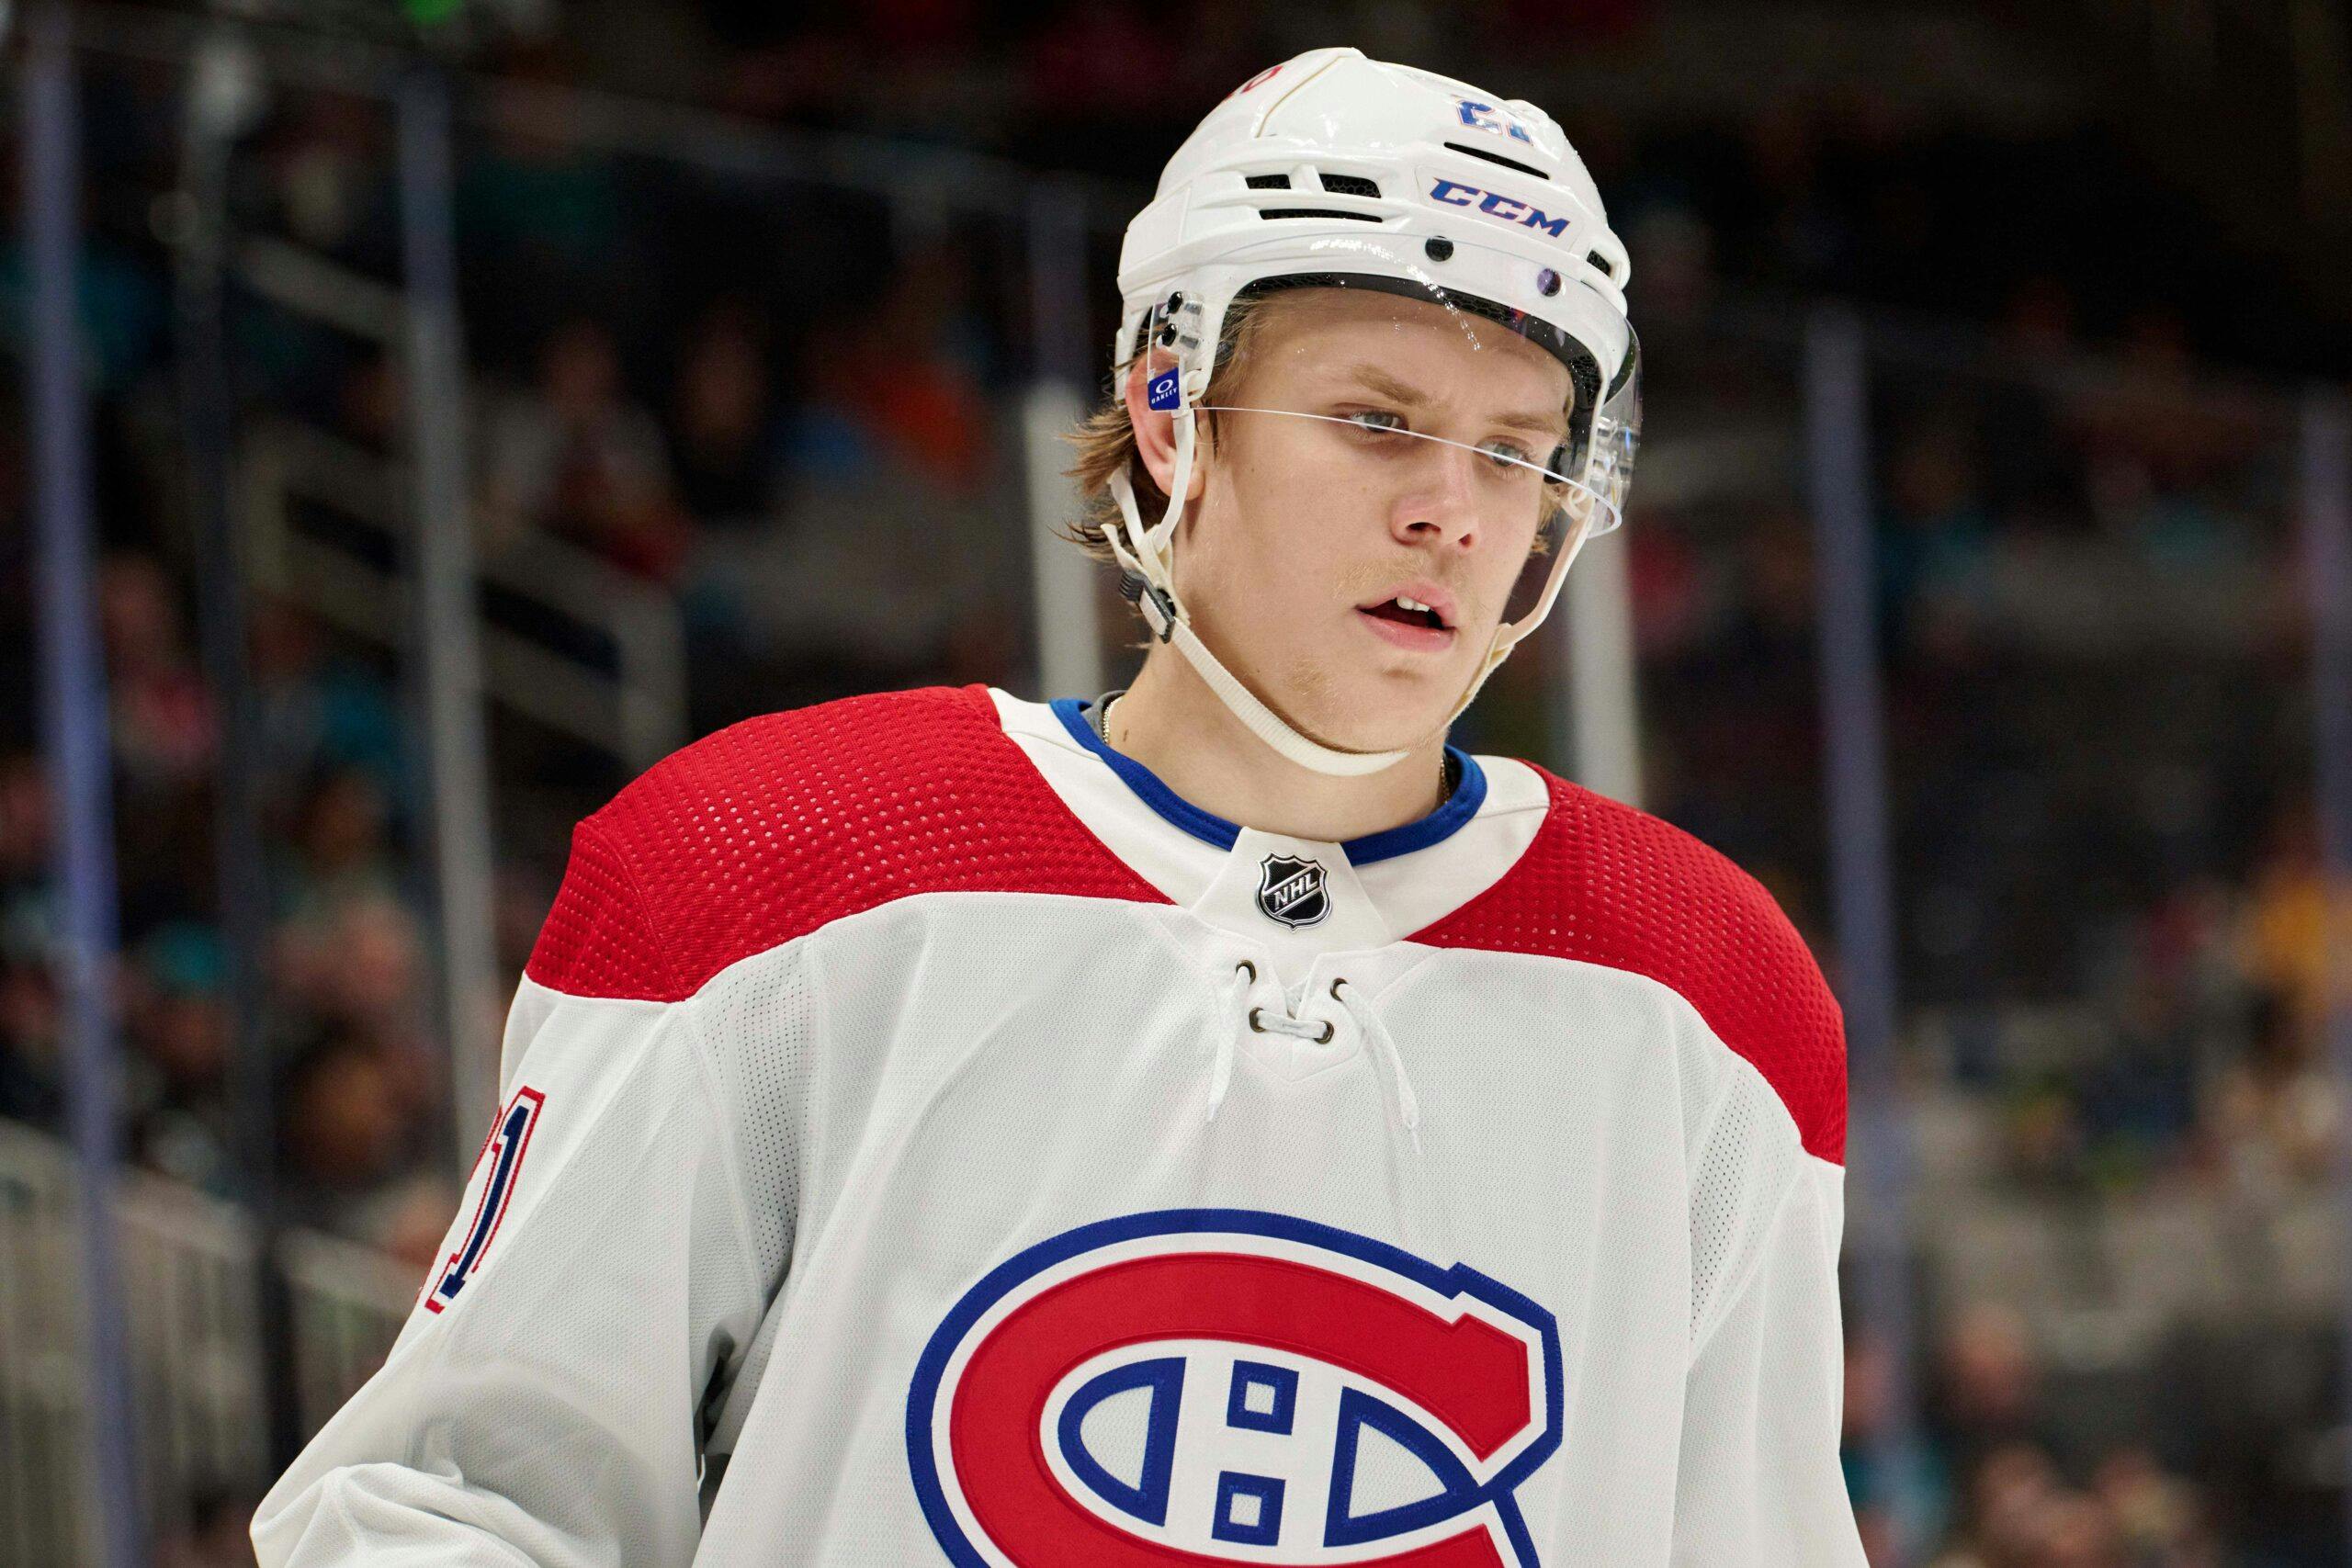 Montreal Canadiens defenseman Kaiden Guhle done for season with ankle injury